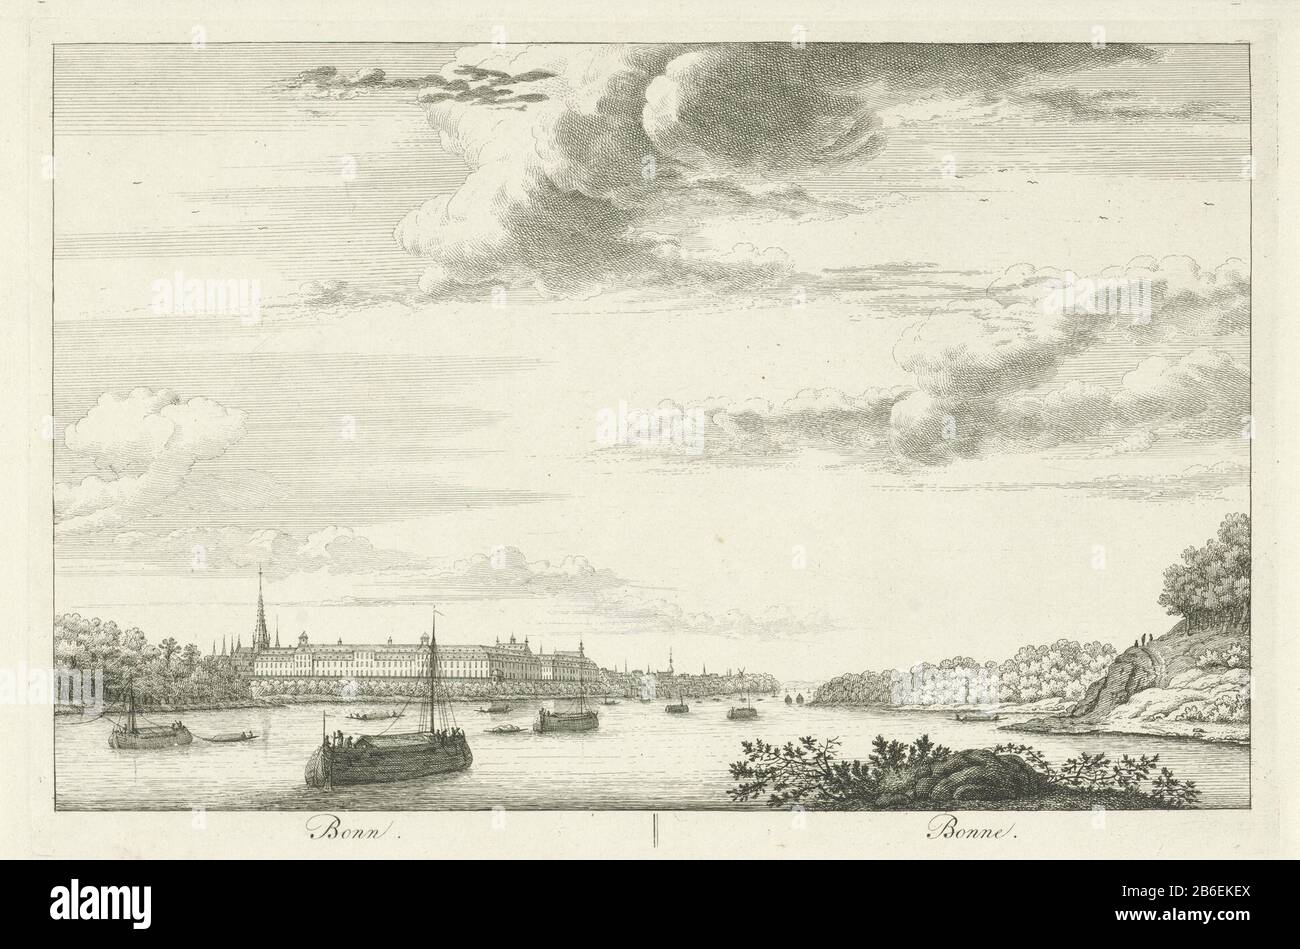 Bonn, as seen from the Rhine Bonn Bonne (title object) faces along the Rhyn (series title) view of the German city of Bonn, seen from the Rhine. The print is a part of a elfdelige series of prints with faces along the Rijn. Manufacturer : print maker: Henry the Lethnaar drawing: Cornelis Ploos van Amstel Publisher: Frederik Willem GreebePlaats manufacture: Amsterdam Date: 1767 Physical characteristics: etching material: paper Technique: etching dimensions: plate edge: h 228 mm × W 343 mm Subject: river prospect of city, town panorama, silhouette of city internships (in general) Where: Bonn Rhi Stock Photo